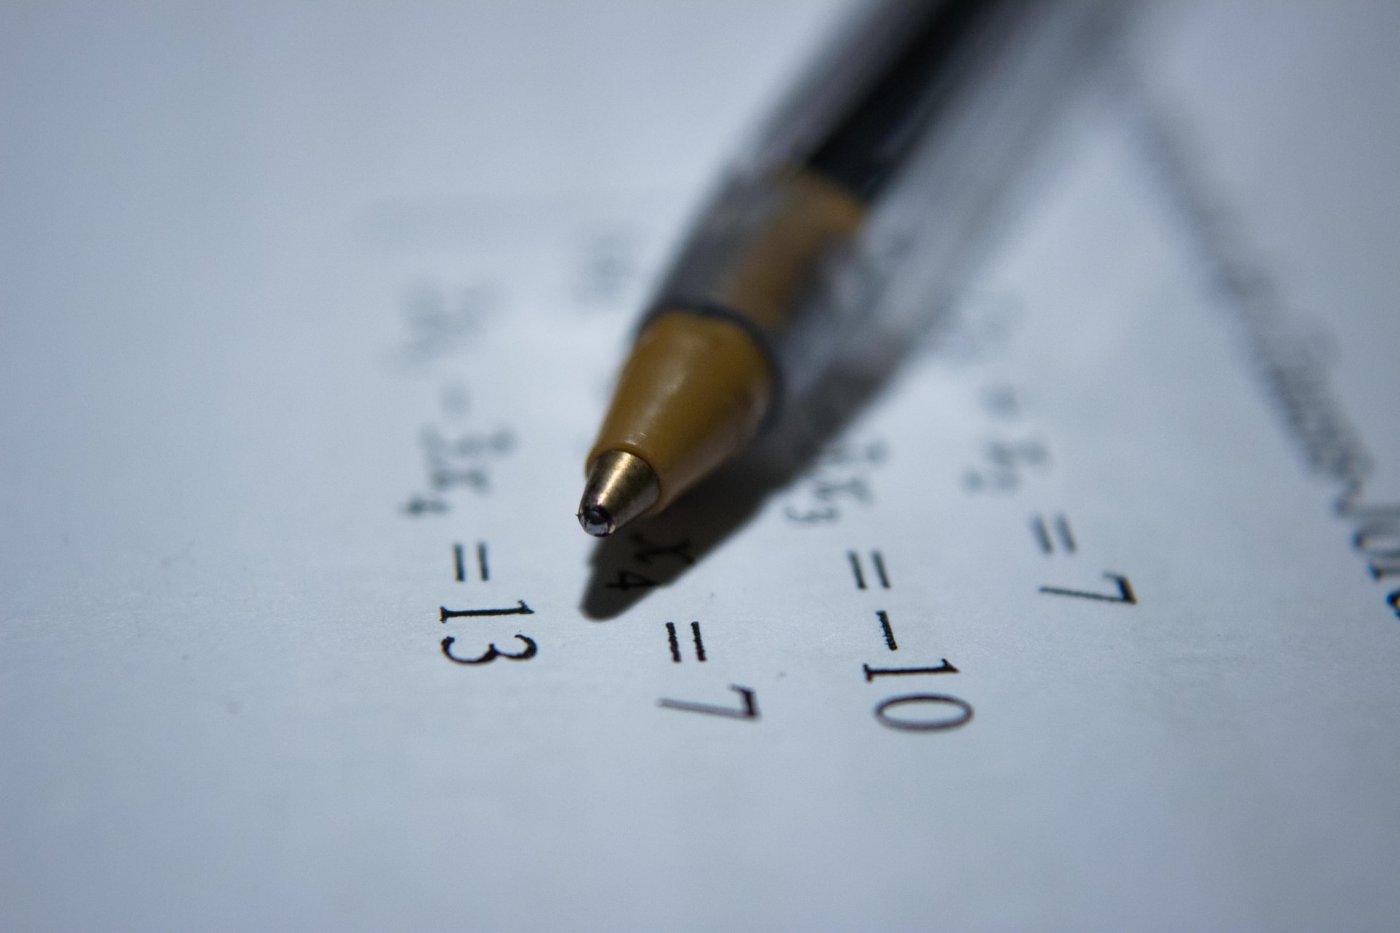 Photo of a pen on top of paper with math expressions